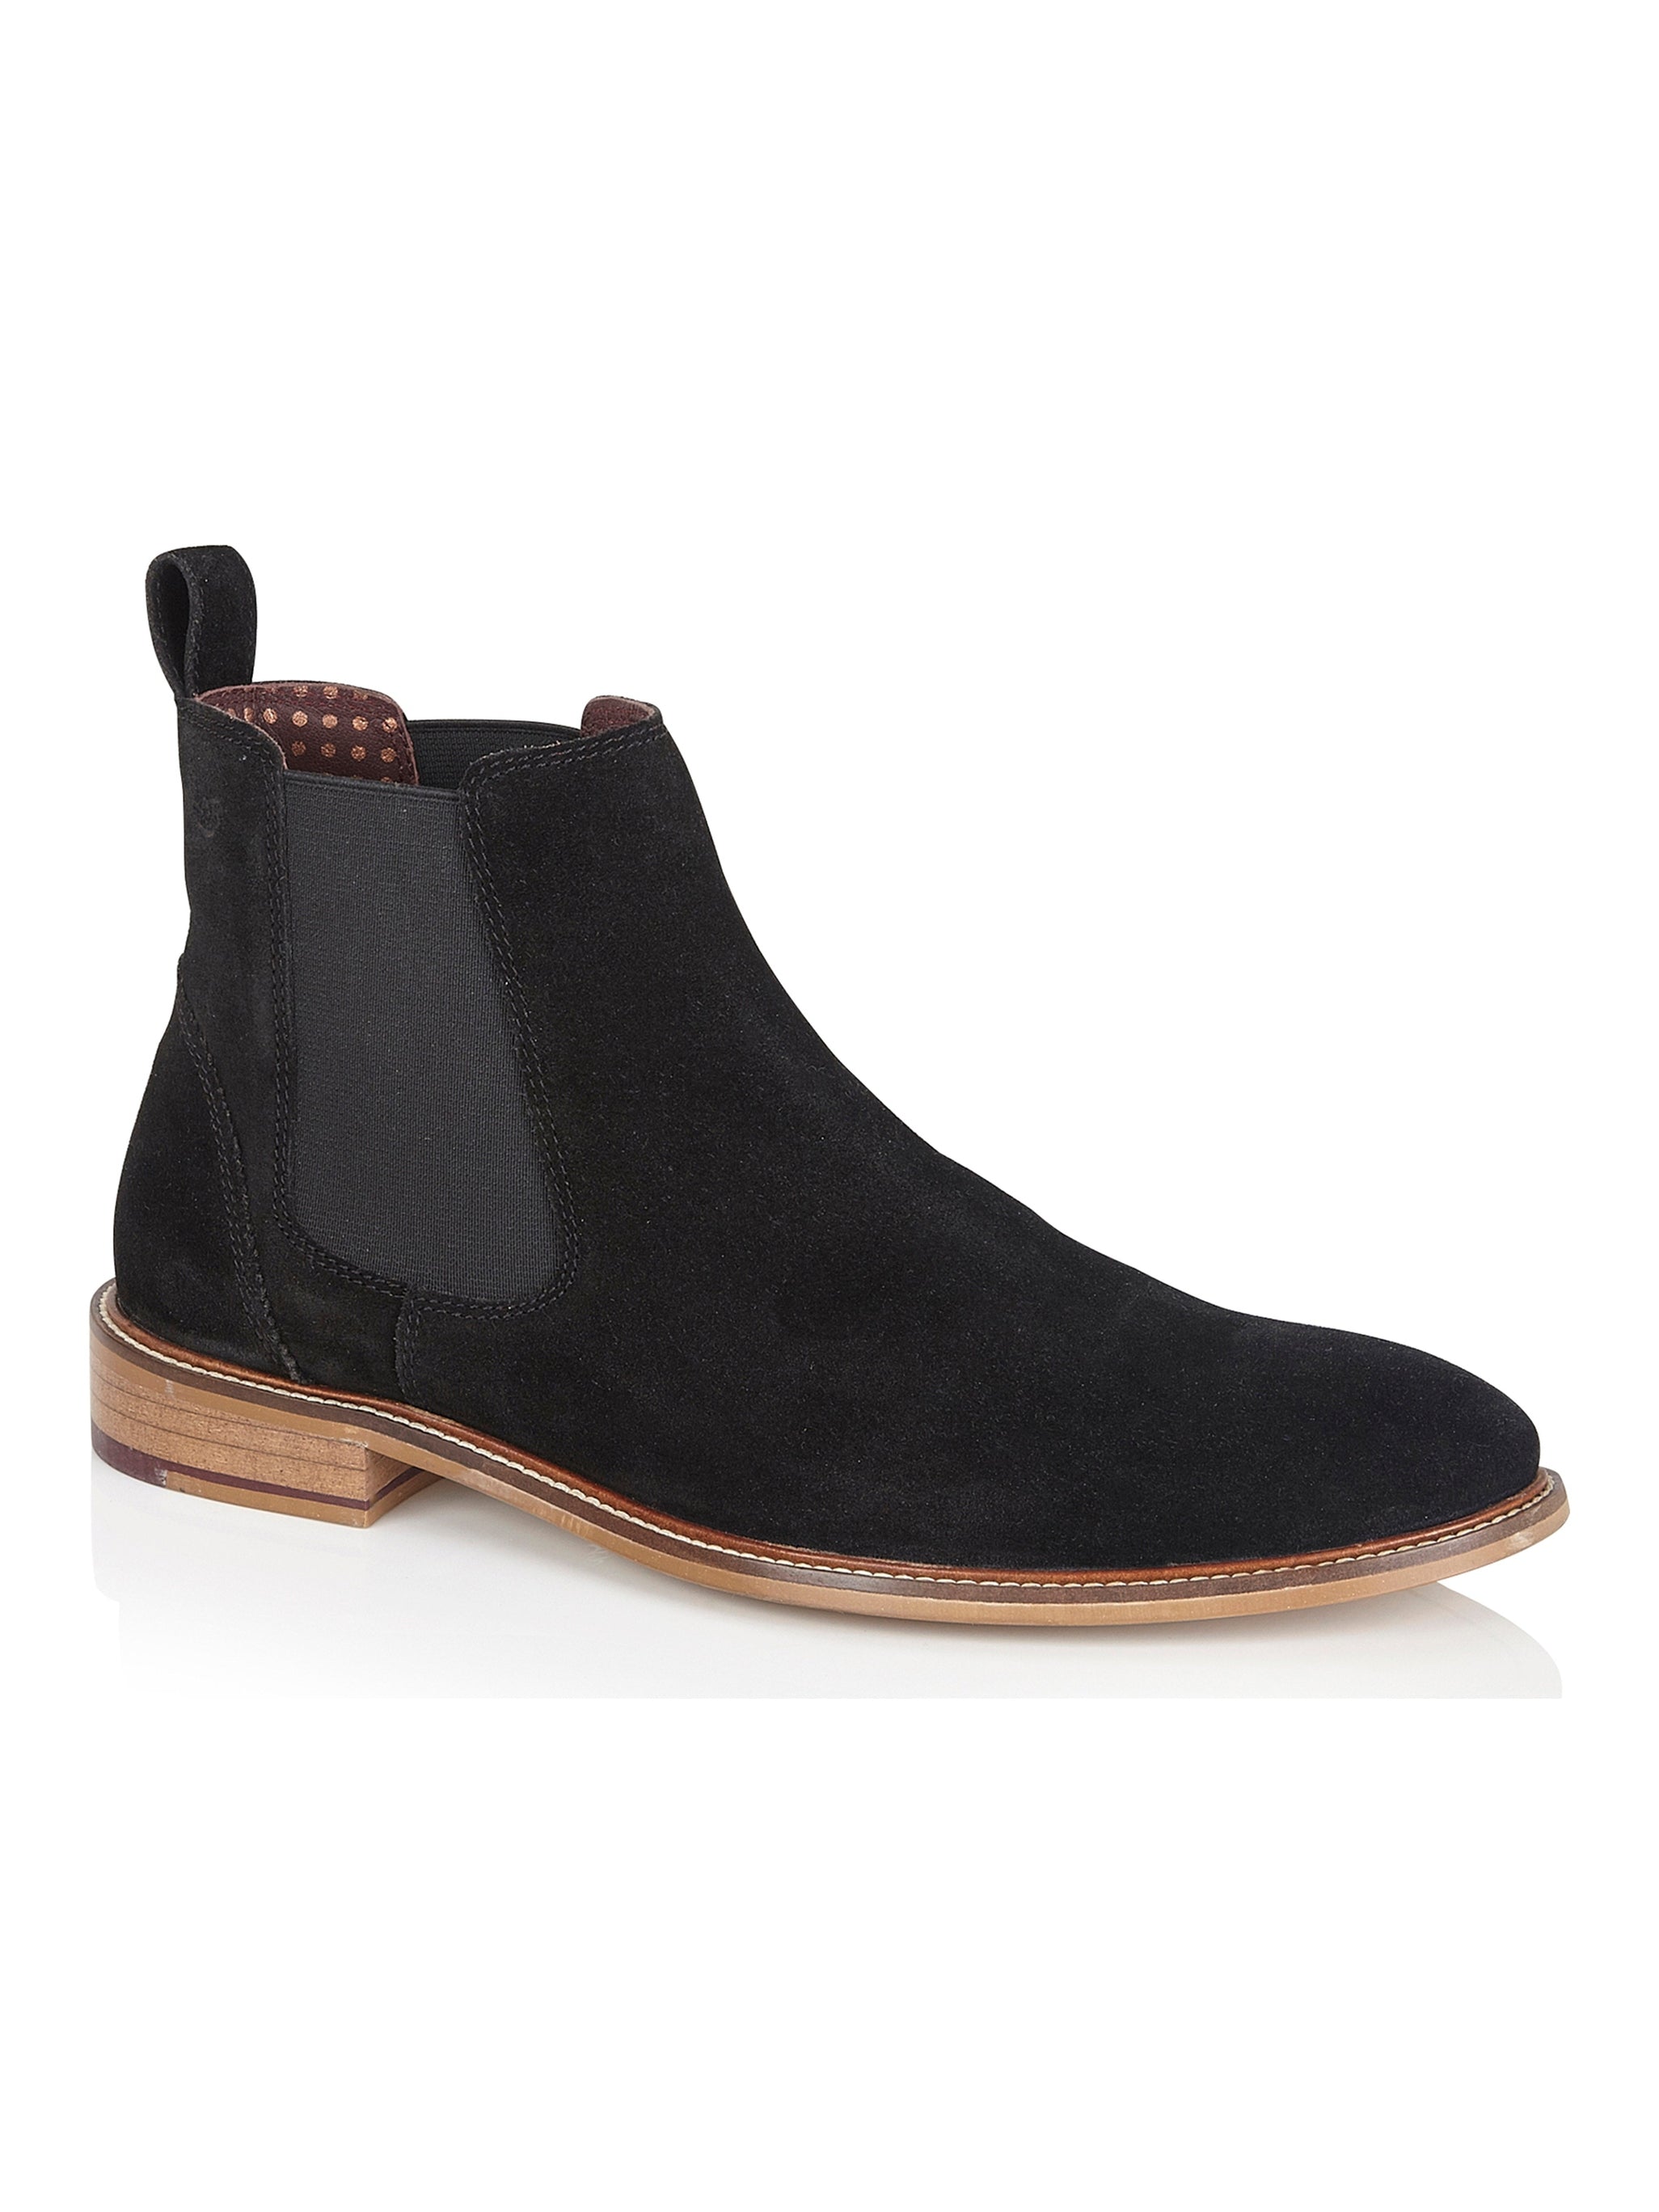 SUEDE CHELSEA BOOTS IN BLACK